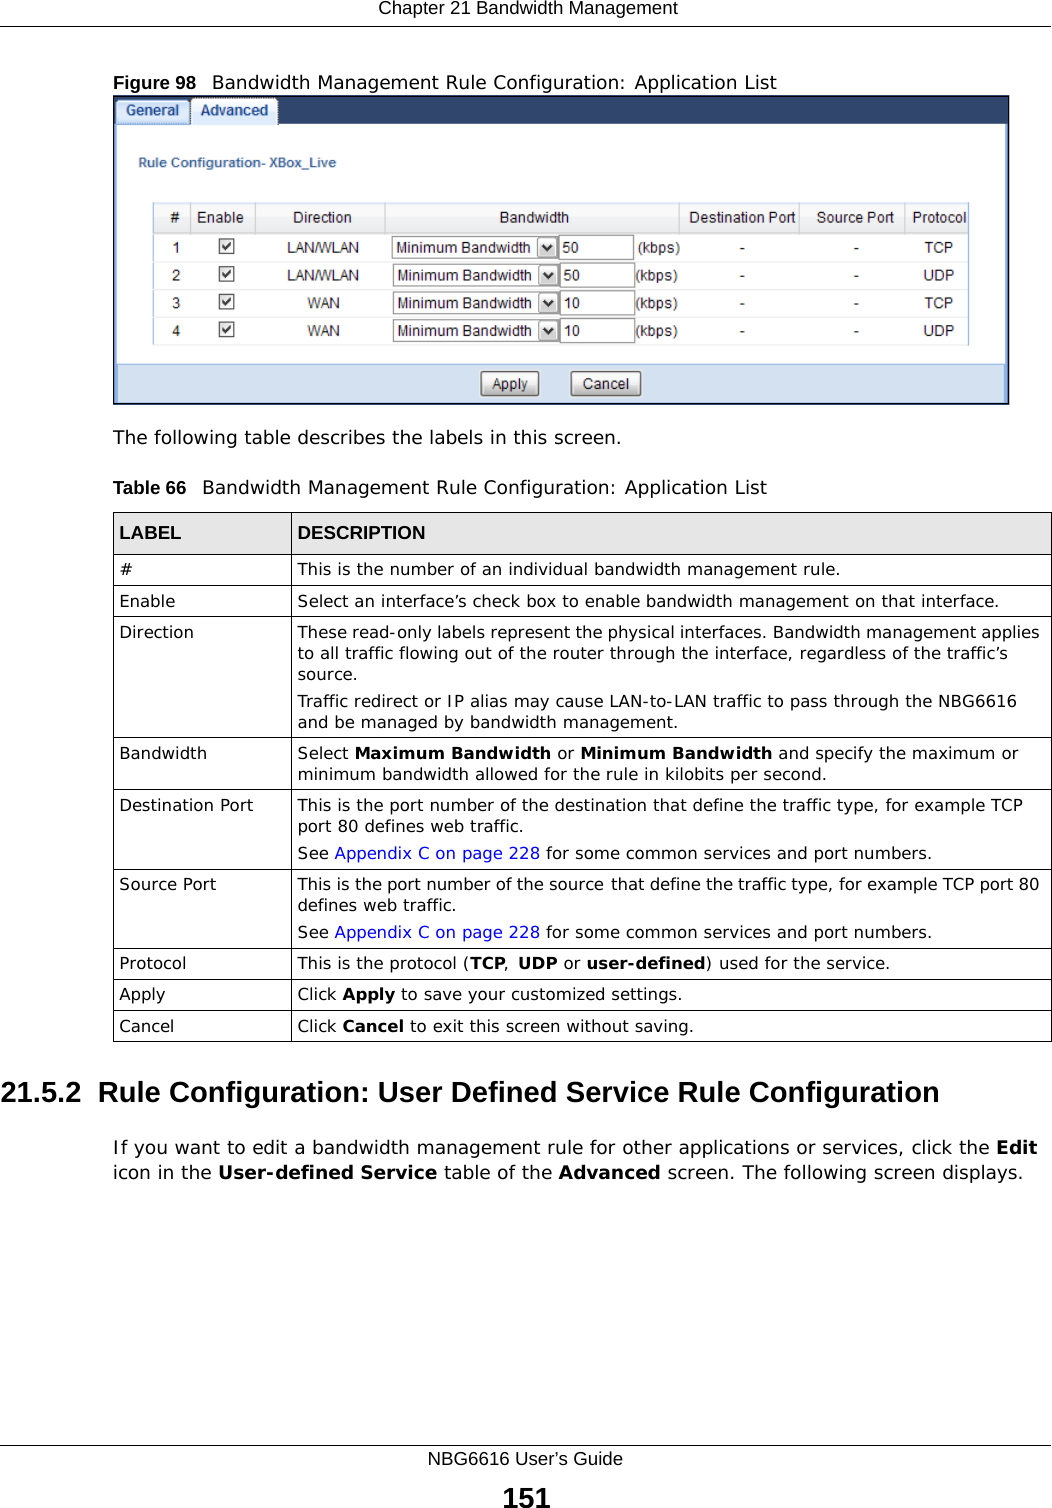  Chapter 21 Bandwidth ManagementNBG6616 User’s Guide151Figure 98   Bandwidth Management Rule Configuration: Application ListThe following table describes the labels in this screen.21.5.2  Rule Configuration: User Defined Service Rule Configuration    If you want to edit a bandwidth management rule for other applications or services, click the Edit icon in the User-defined Service table of the Advanced screen. The following screen displays.Table 66   Bandwidth Management Rule Configuration: Application ListLABEL DESCRIPTION#This is the number of an individual bandwidth management rule.Enable Select an interface’s check box to enable bandwidth management on that interface. Direction  These read-only labels represent the physical interfaces. Bandwidth management applies to all traffic flowing out of the router through the interface, regardless of the traffic’s source.Traffic redirect or IP alias may cause LAN-to-LAN traffic to pass through the NBG6616 and be managed by bandwidth management.Bandwidth Select Maximum Bandwidth or Minimum Bandwidth and specify the maximum or minimum bandwidth allowed for the rule in kilobits per second. Destination Port This is the port number of the destination that define the traffic type, for example TCP port 80 defines web traffic.See Appendix C on page 228 for some common services and port numbers.Source Port This is the port number of the source that define the traffic type, for example TCP port 80 defines web traffic.See Appendix C on page 228 for some common services and port numbers.Protocol This is the protocol (TCP, UDP or user-defined) used for the service.Apply Click Apply to save your customized settings.Cancel Click Cancel to exit this screen without saving.